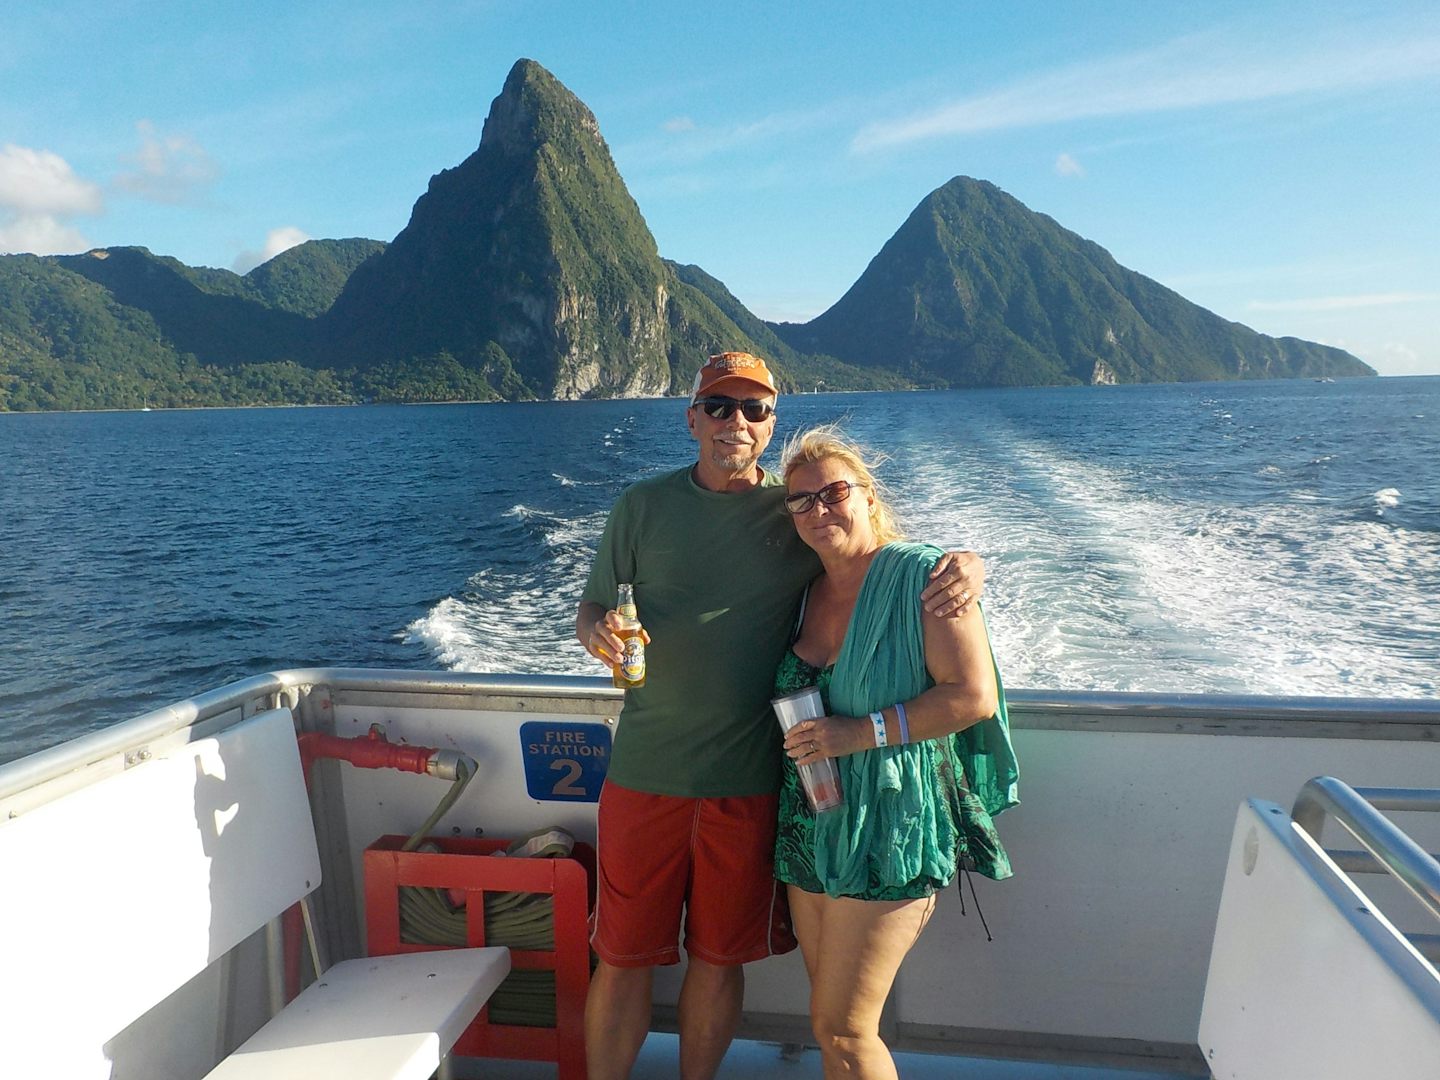 After snorkeling under the Pitons, heading back to the ship.